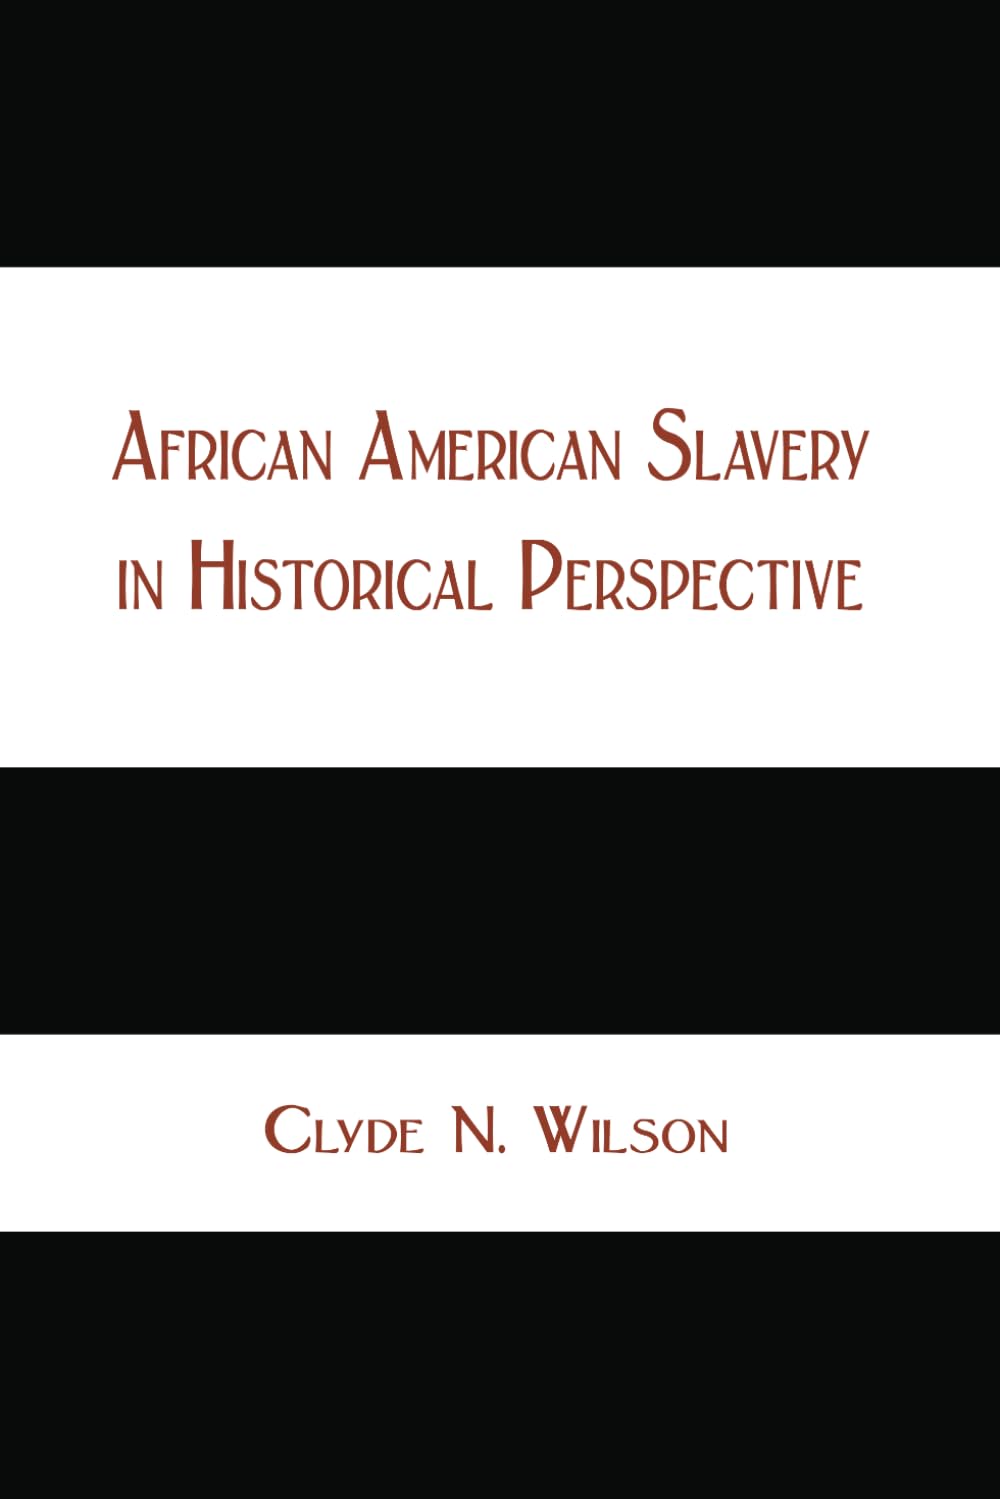 African-American Slavery in Historical Perspective